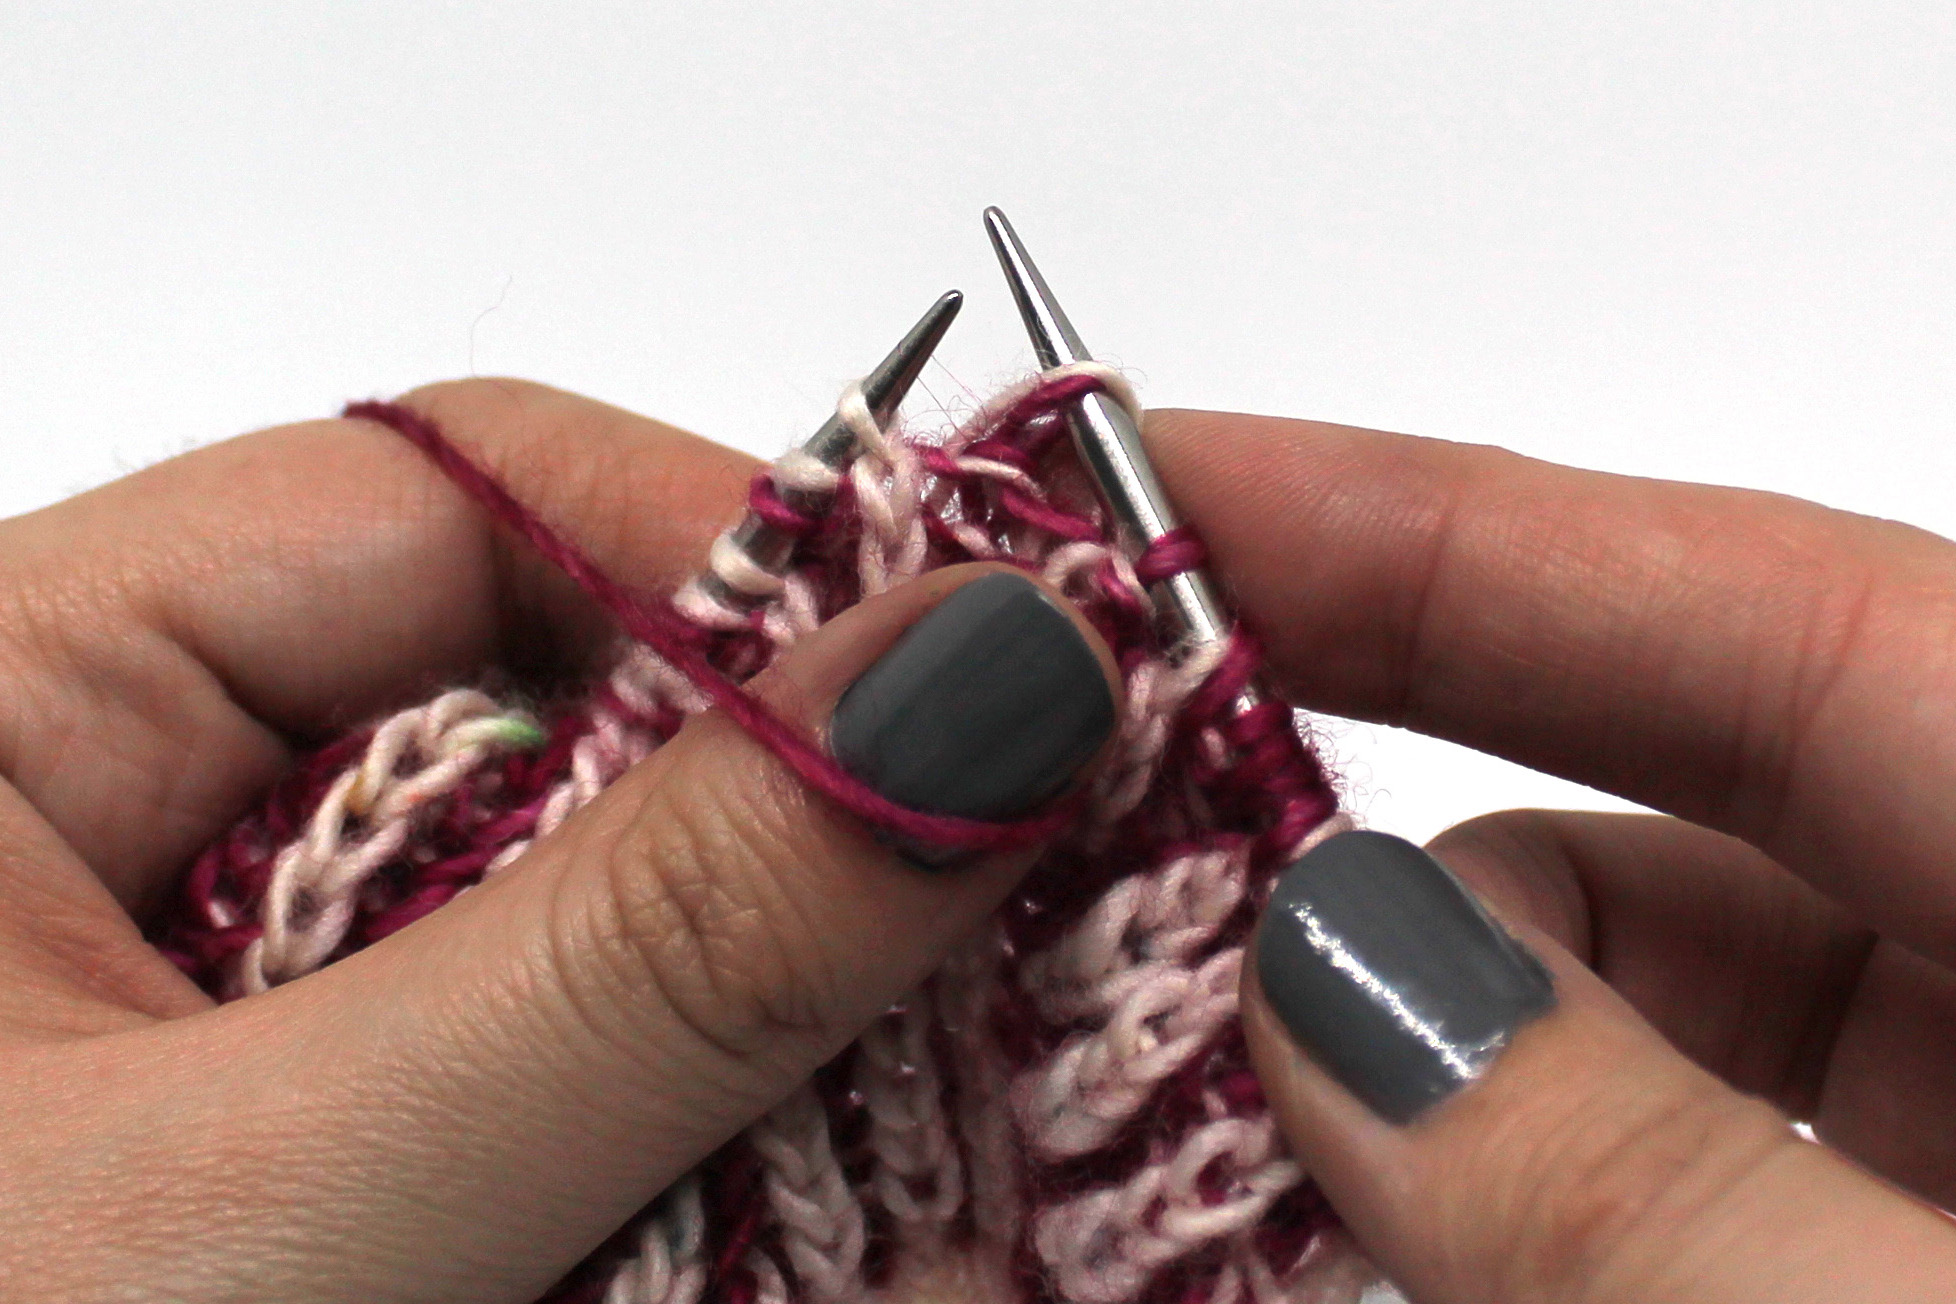 The first stitch on the left hand needle has been slipped knitwise to the right hand needle